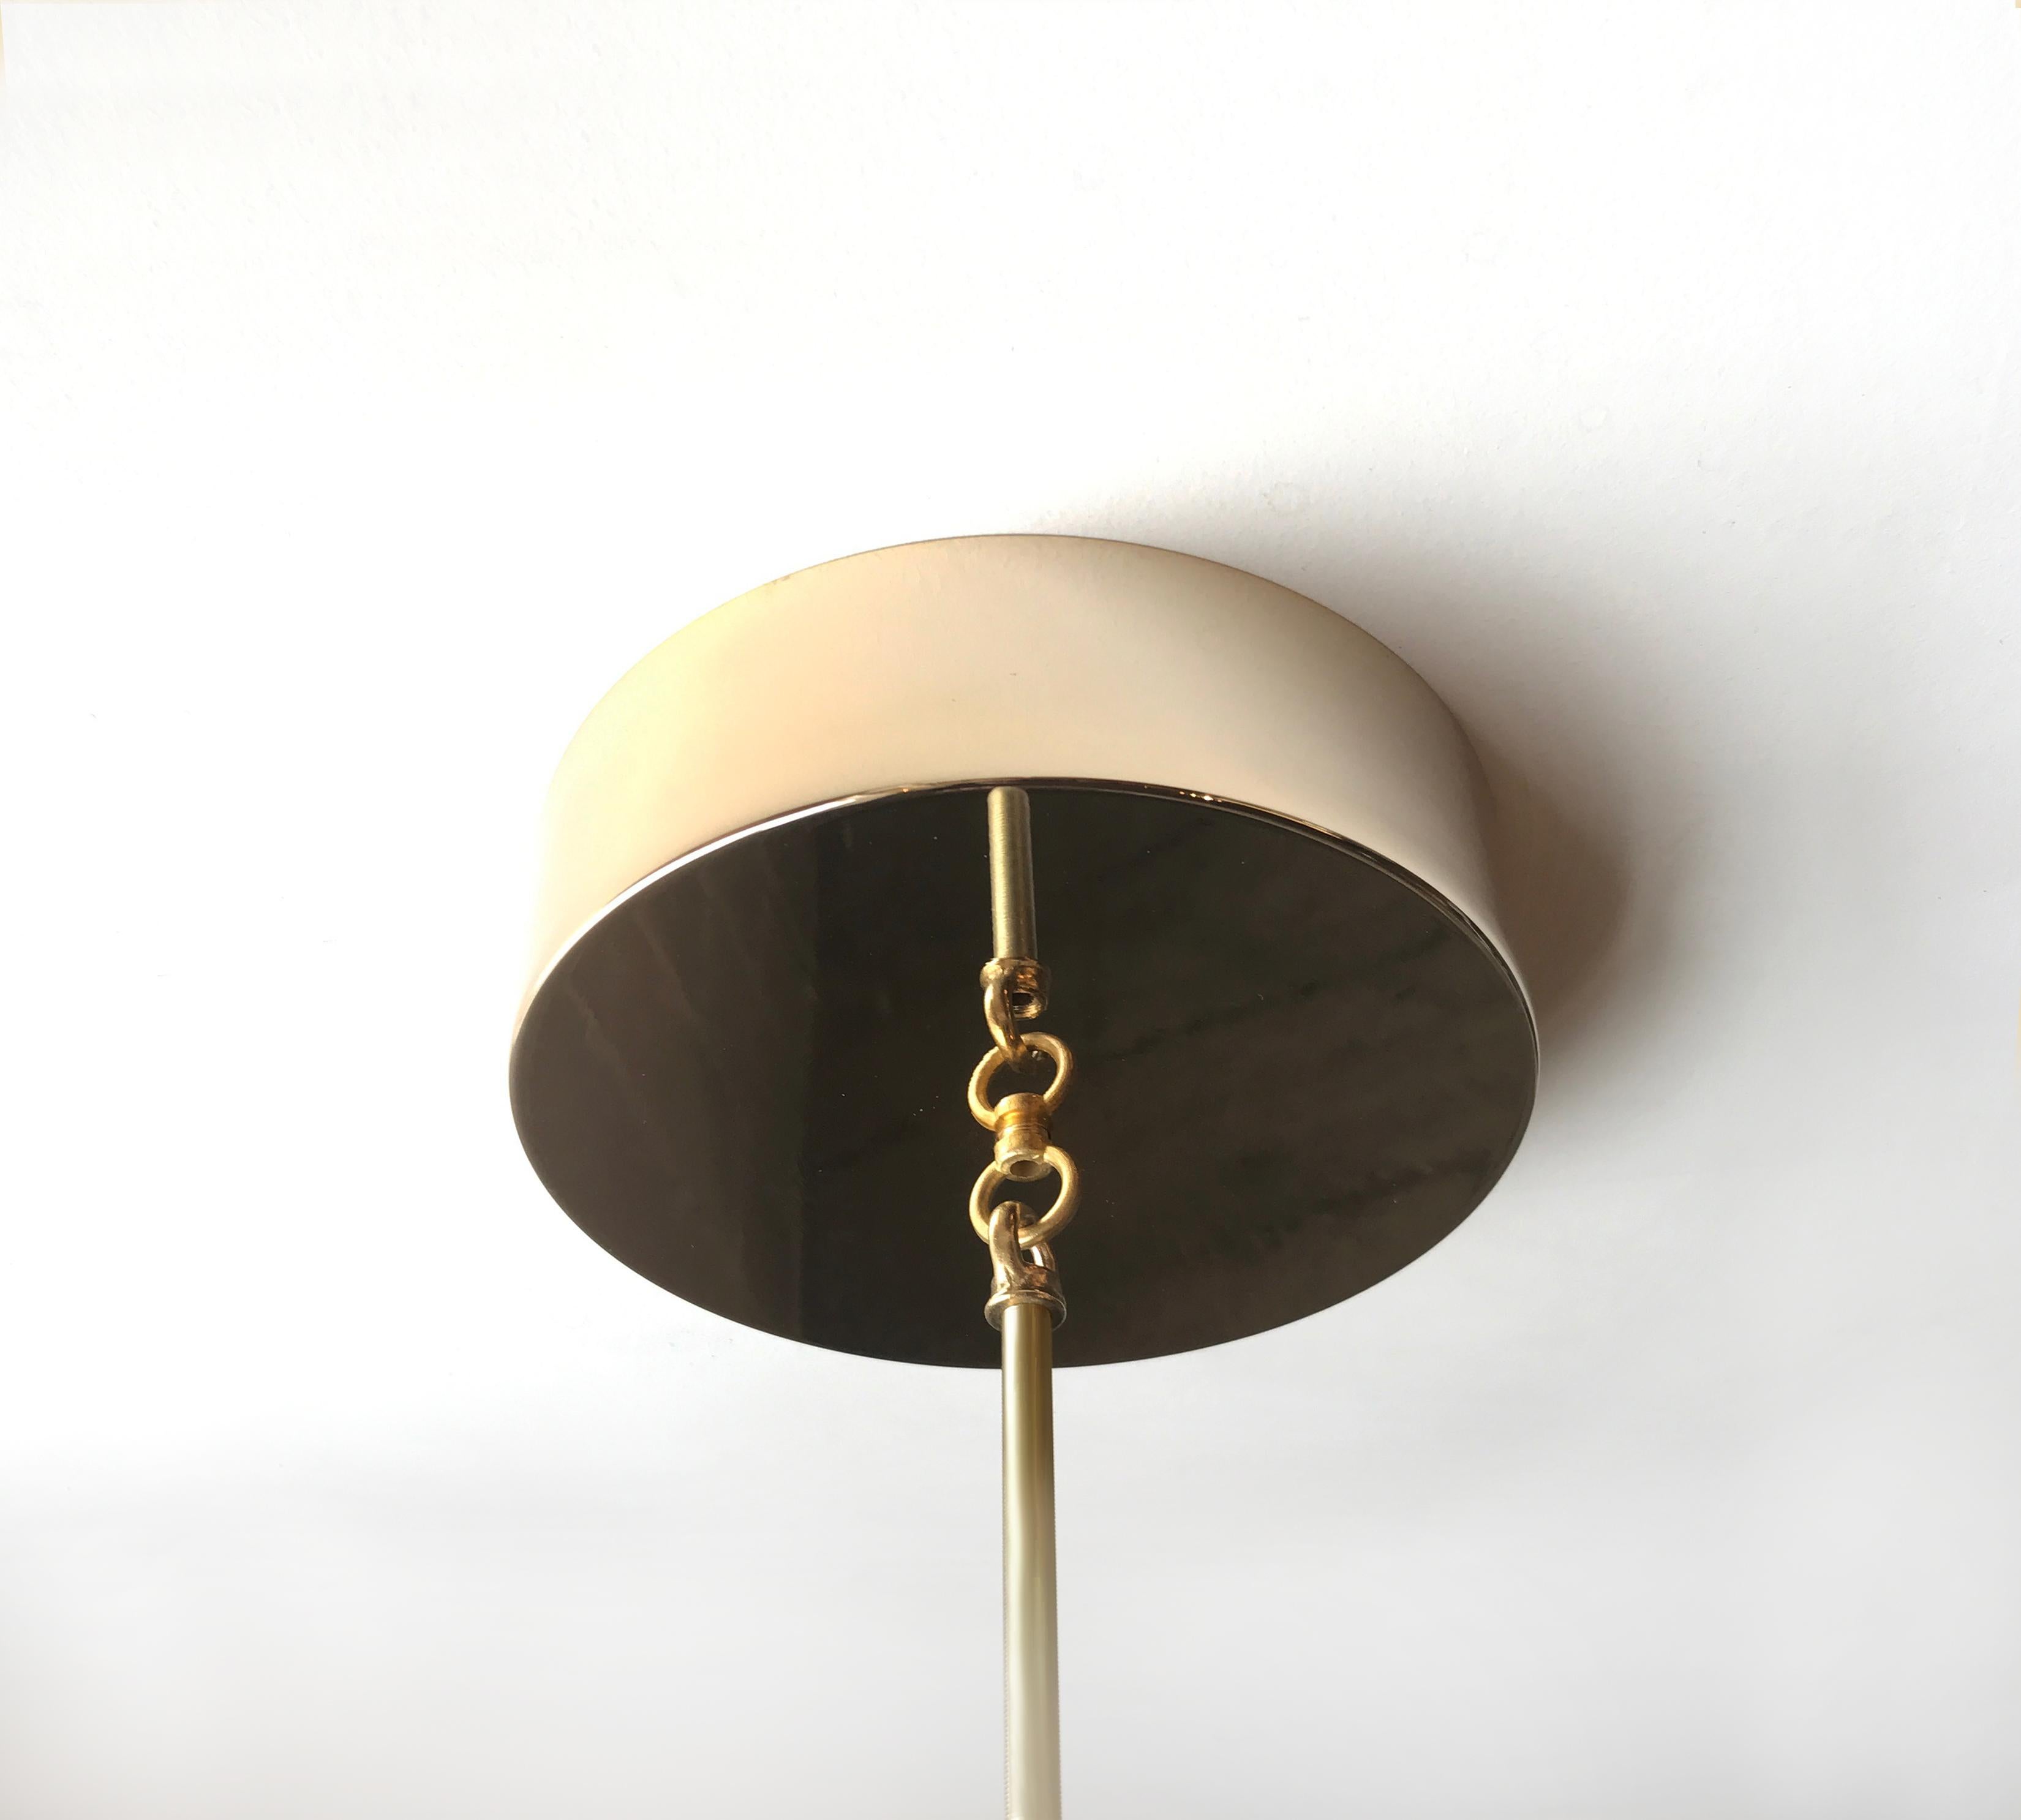 Hand-Crafted 4-foot Pendant Light in Black Walnut with Brass Fixtures by Hinterland Design For Sale